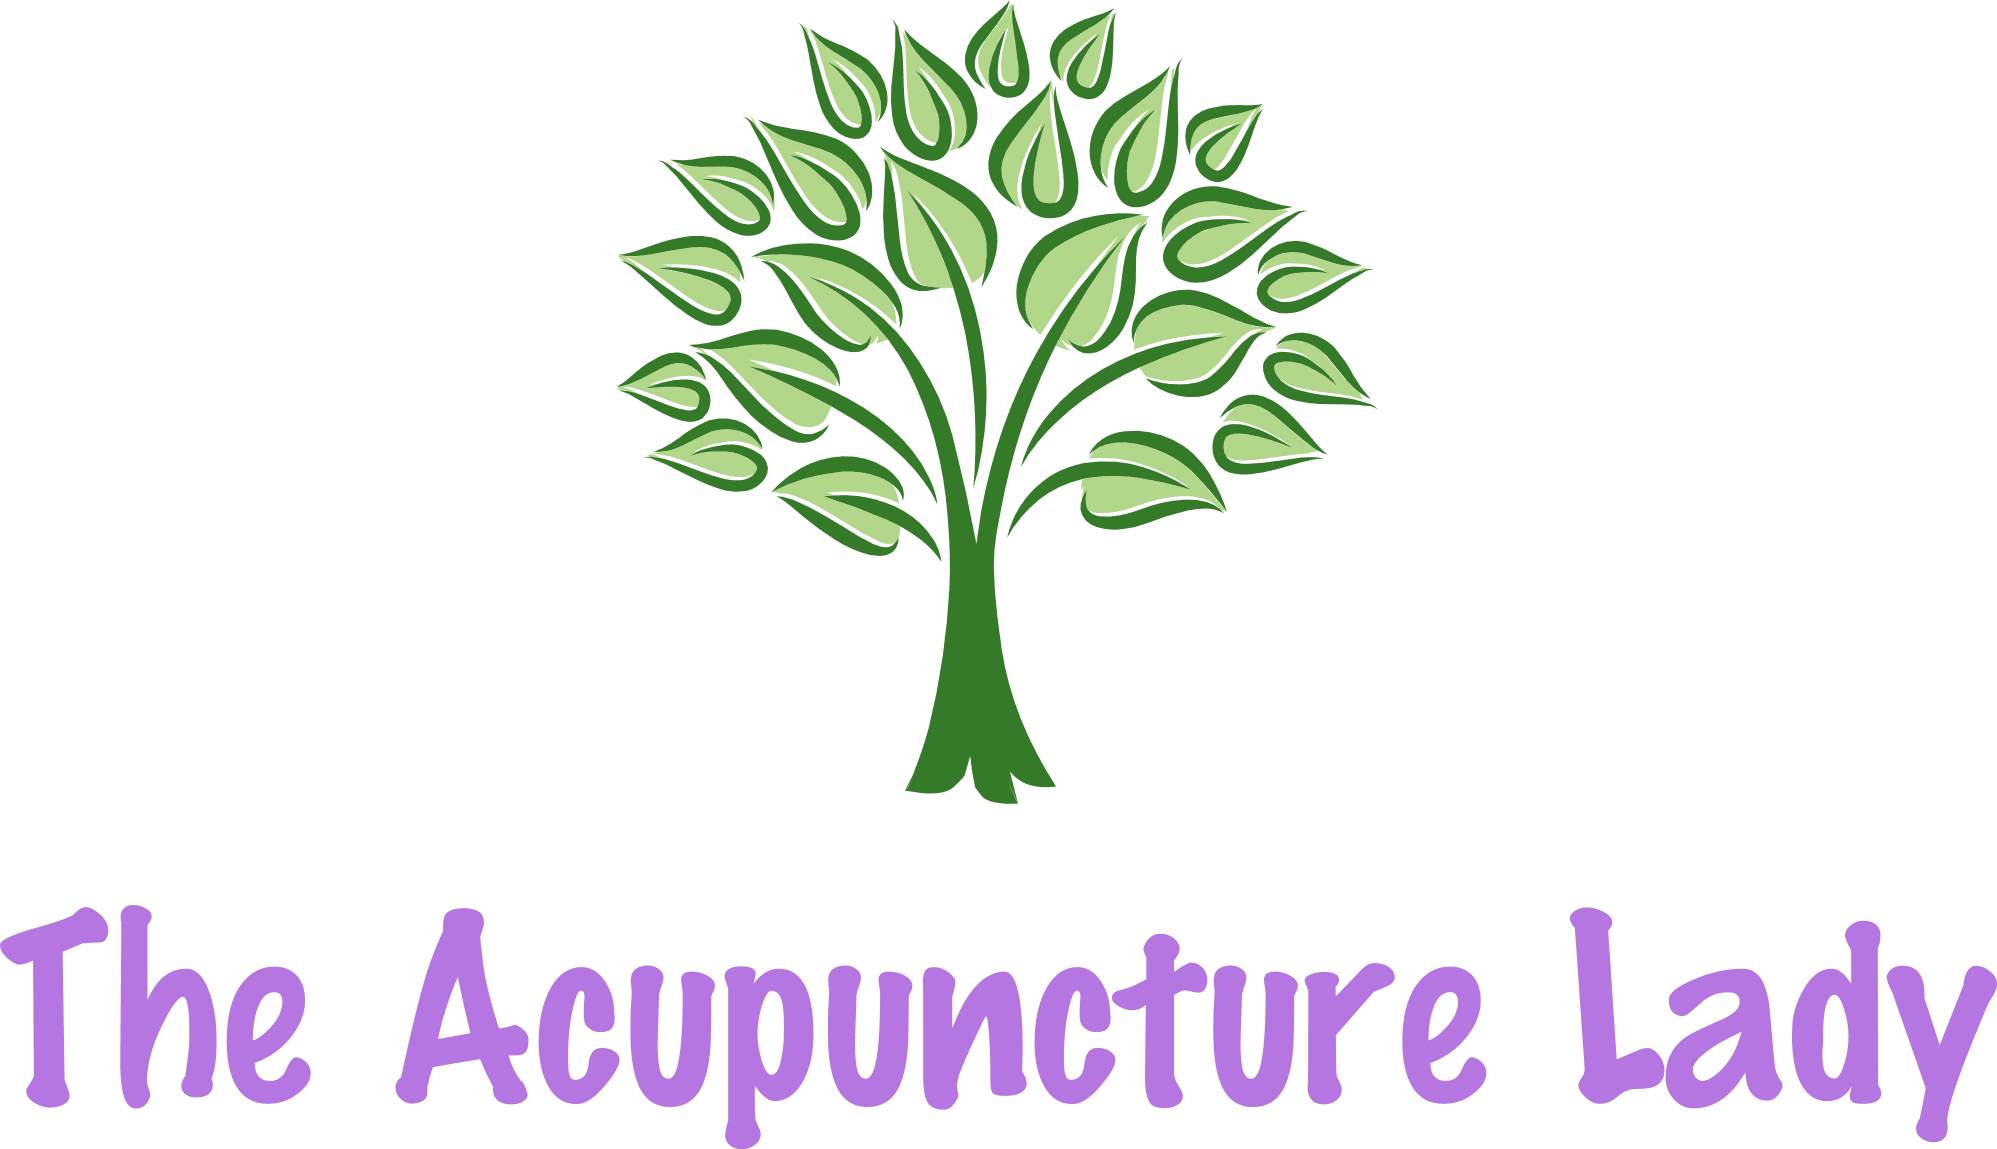 The Acupuncture Lady